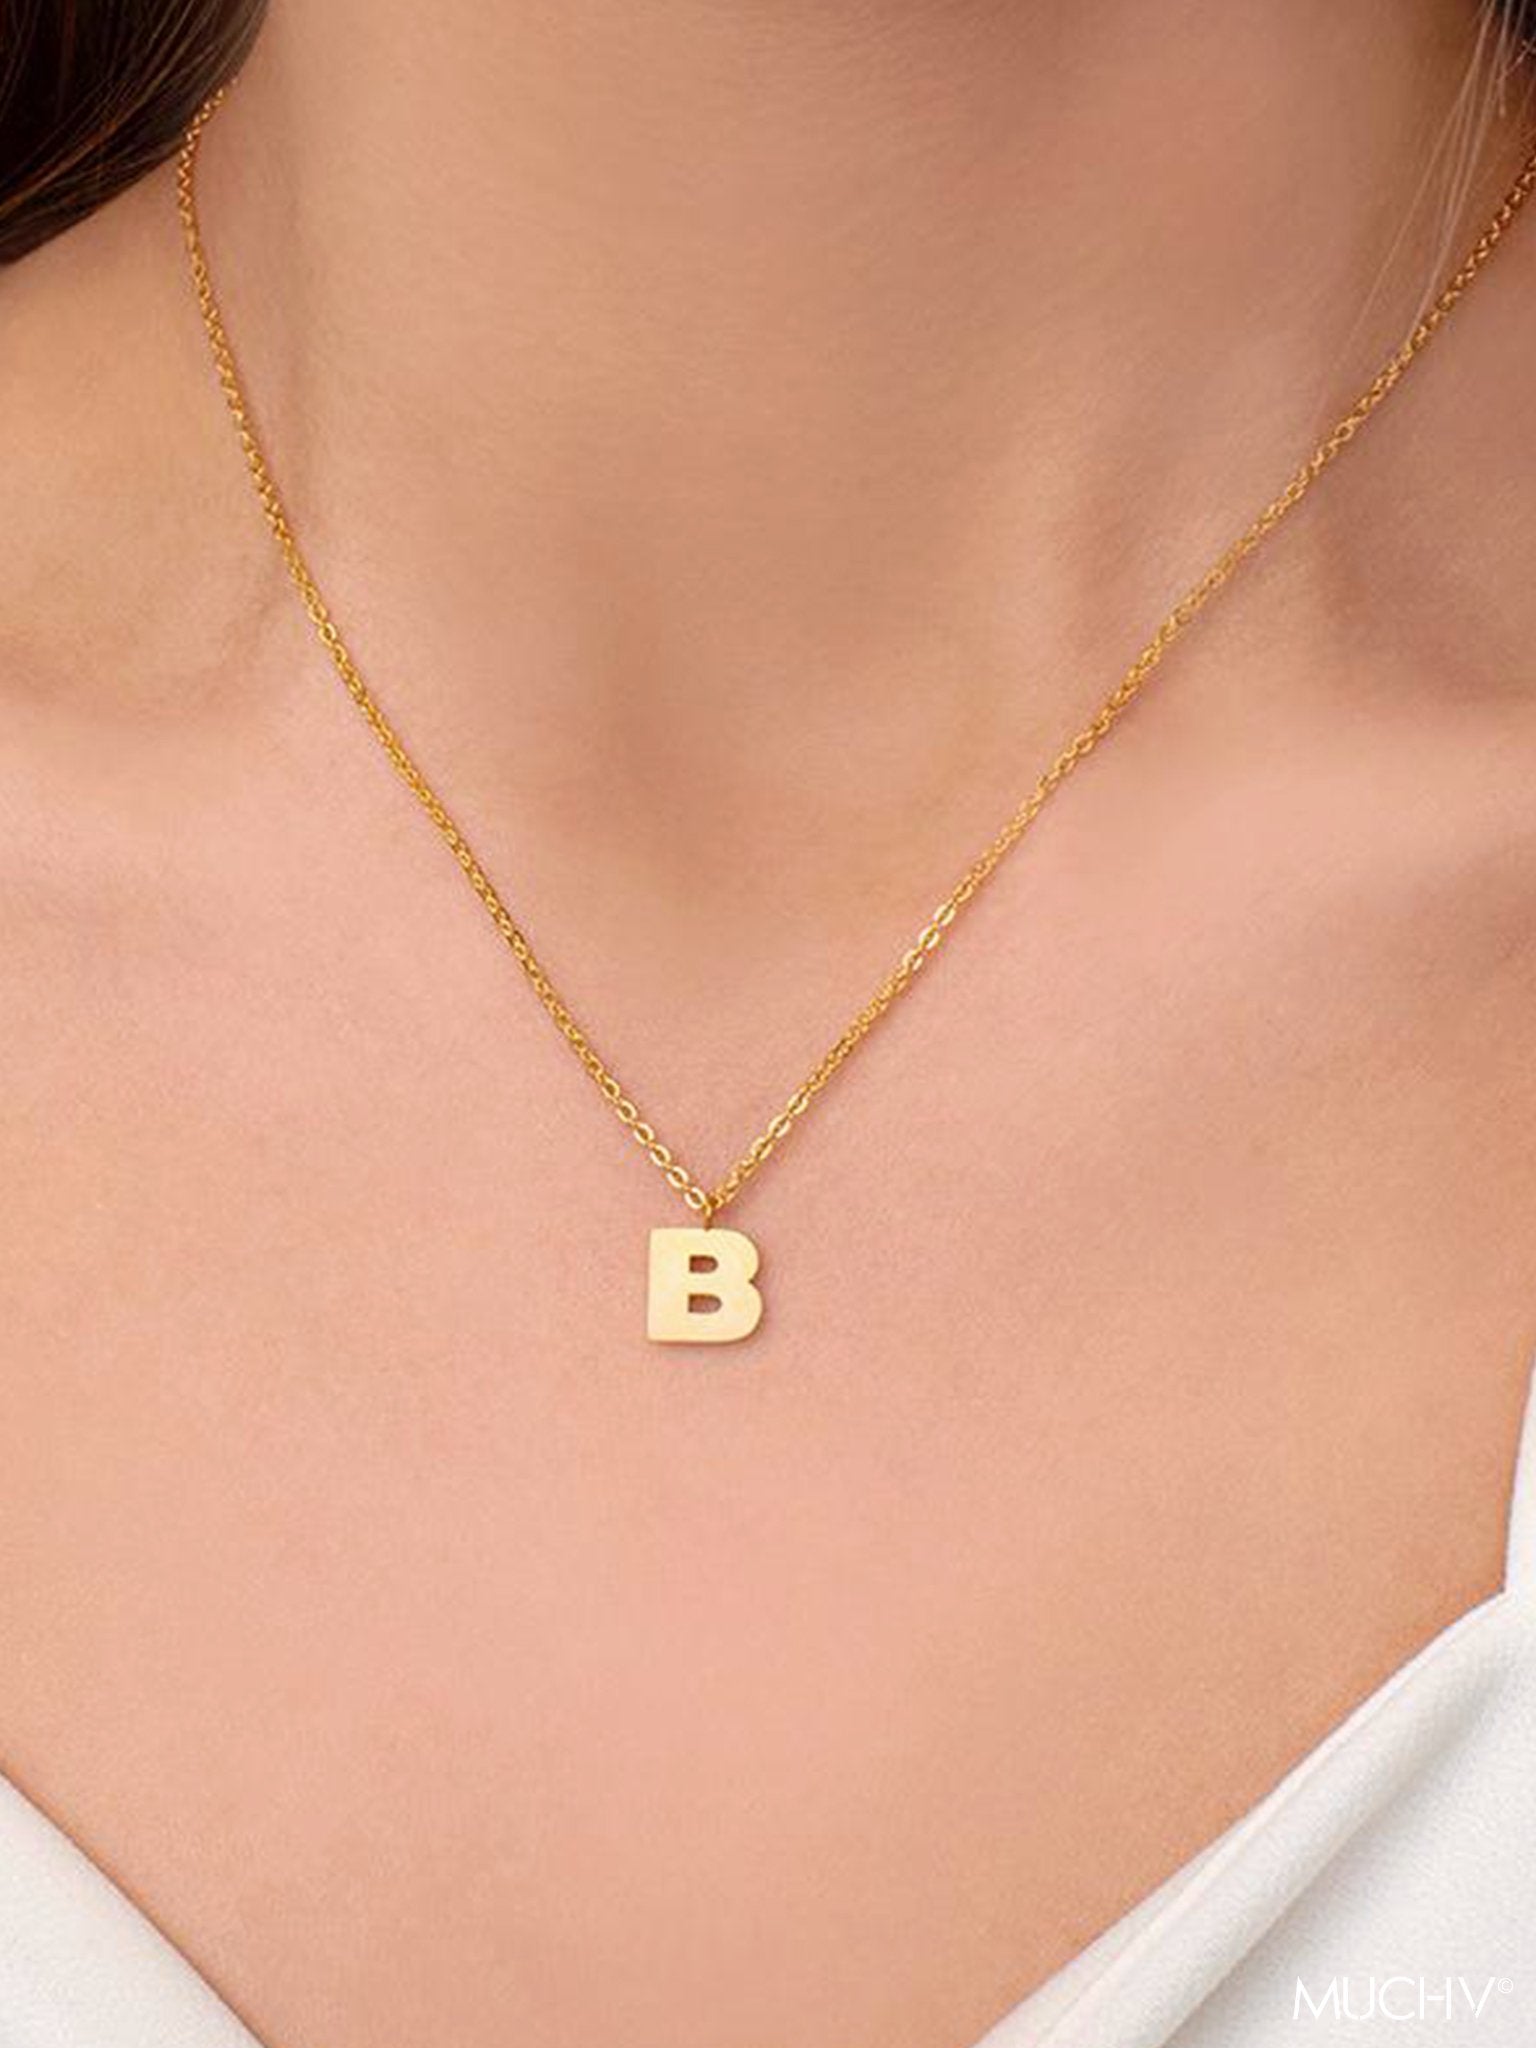 Gold necklace with a small initial letter.